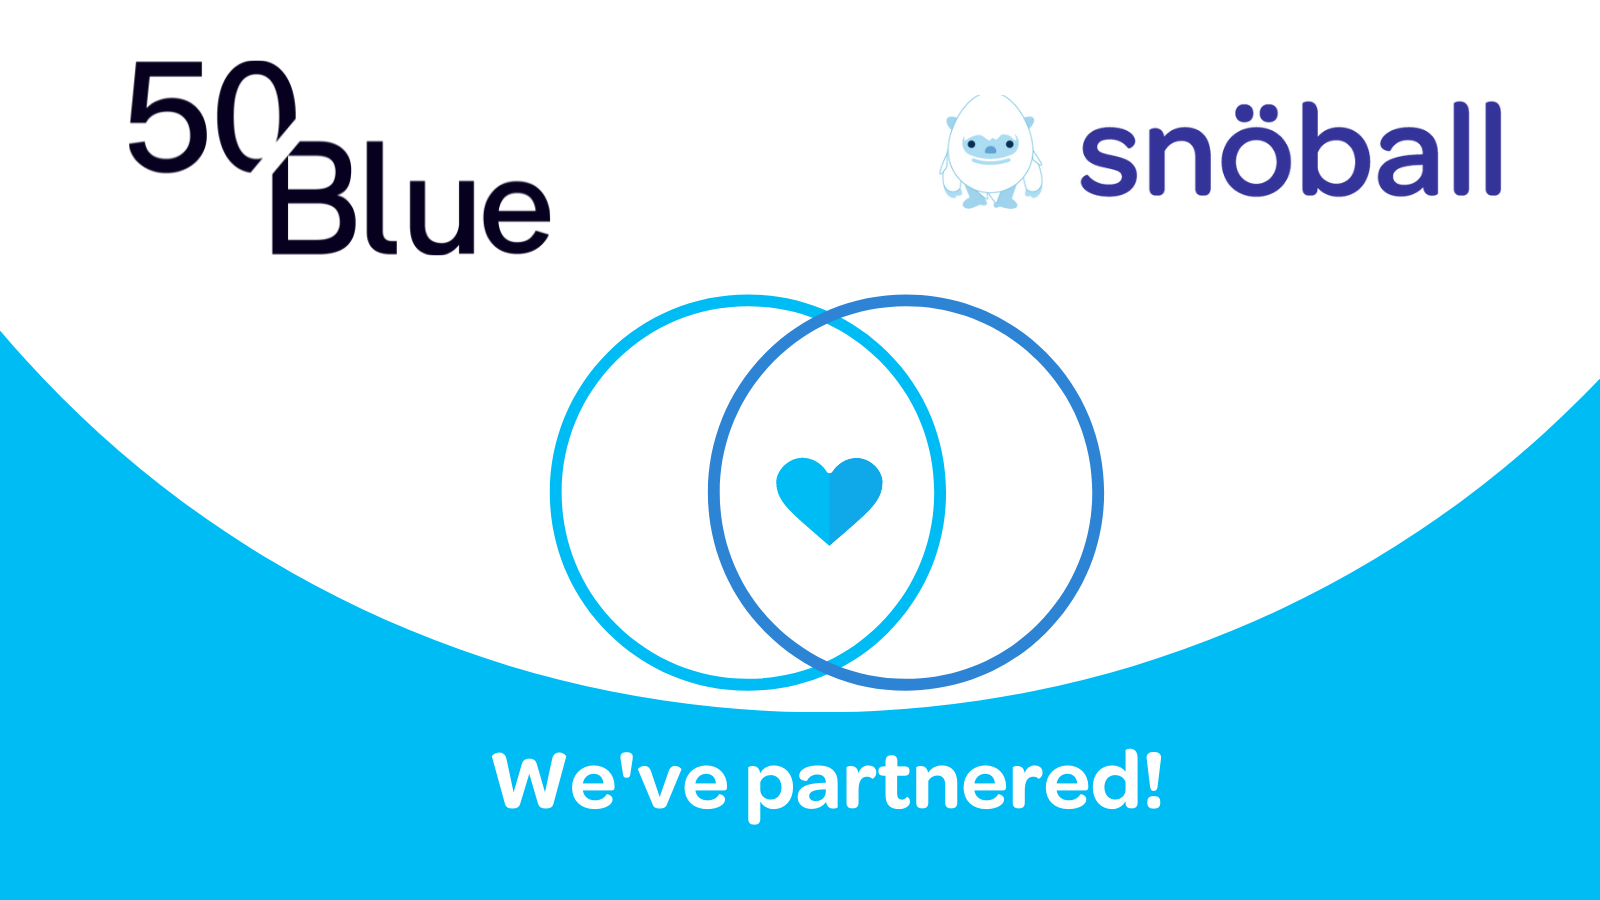 Snöball partners with 50Blue